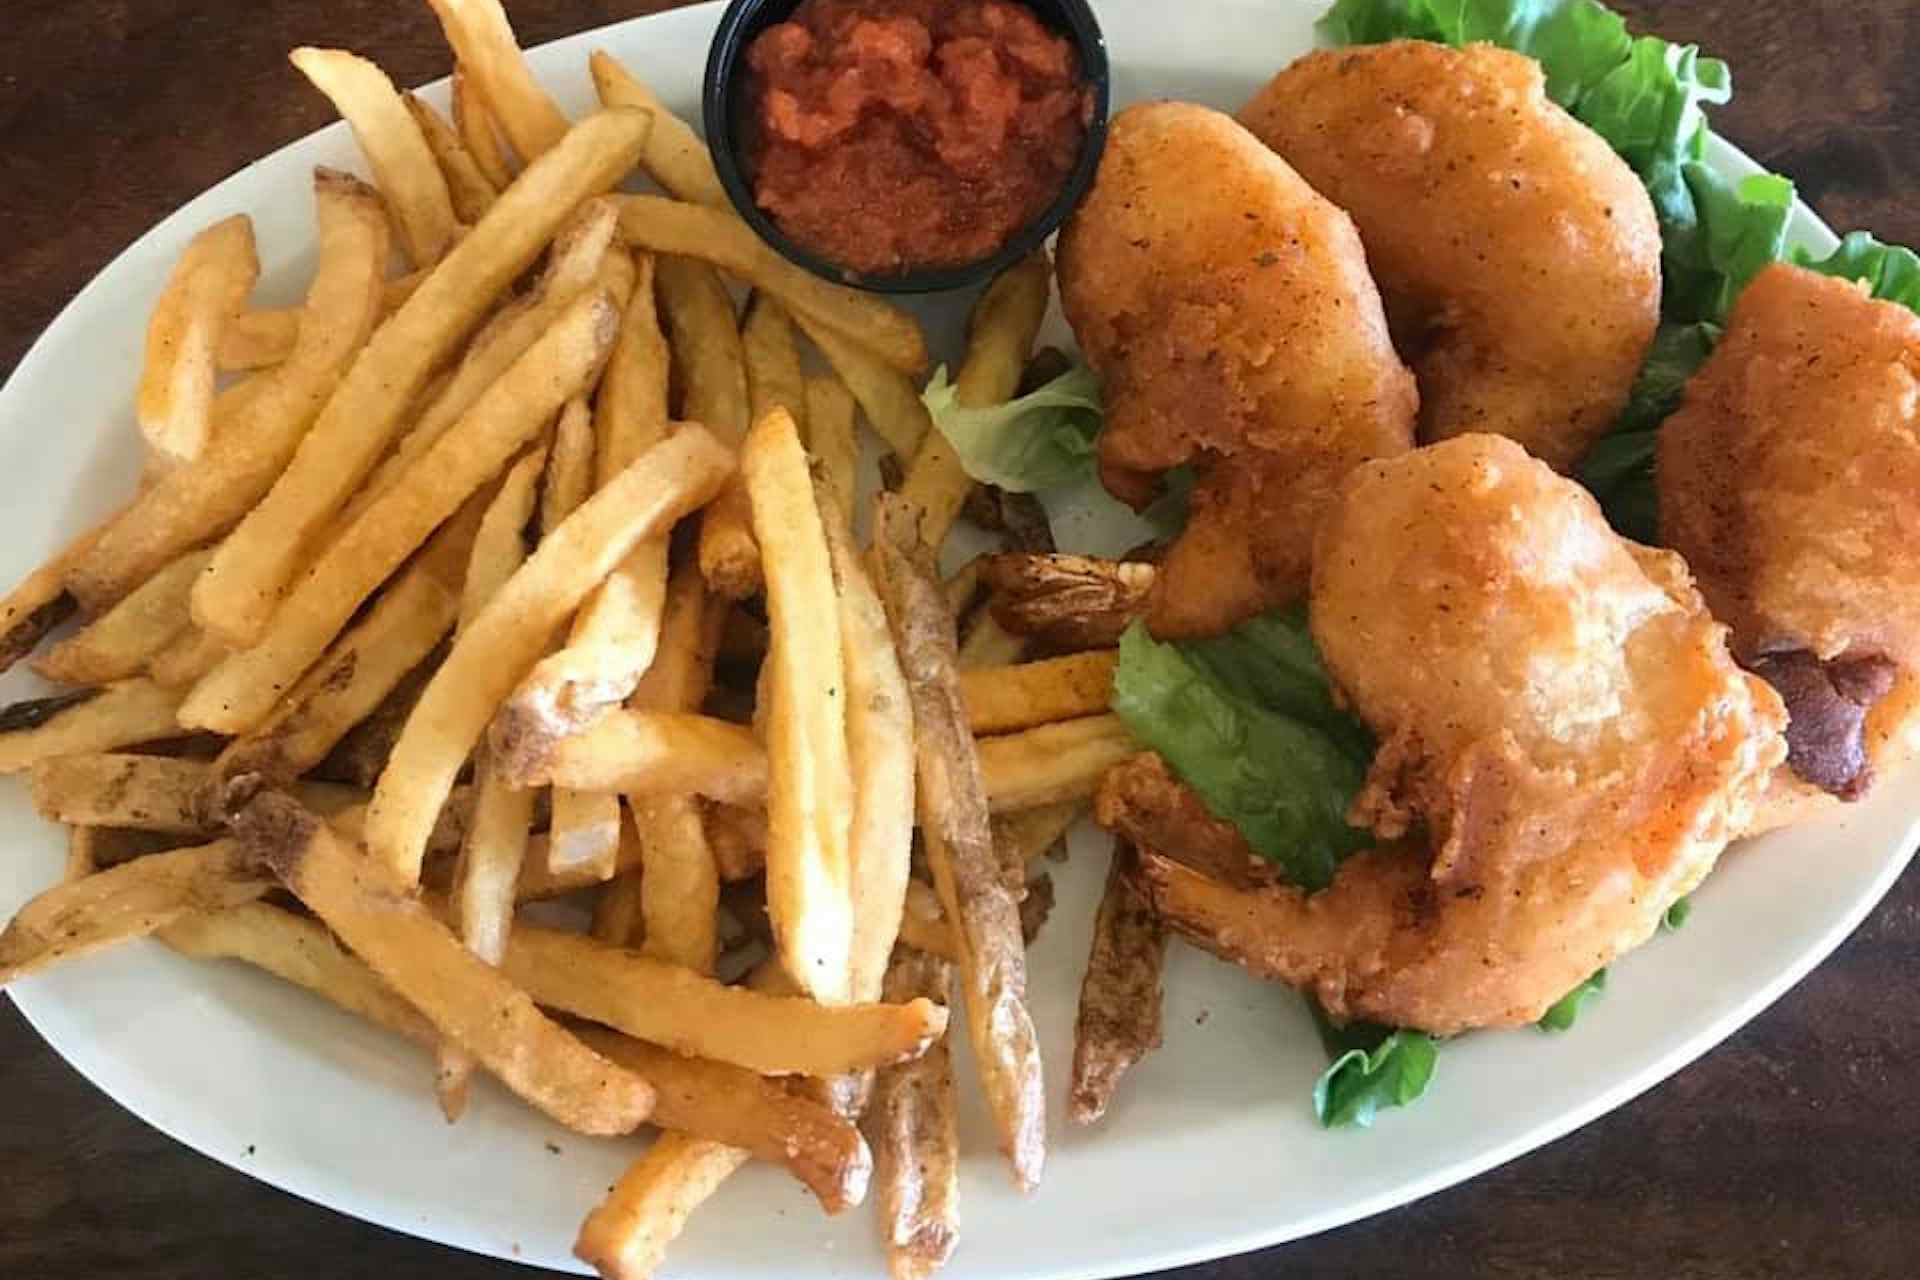 Housemade battered shrimp and fries served at the Frosty Gator in Idaho Falls of the Yellowstone Teton Territory